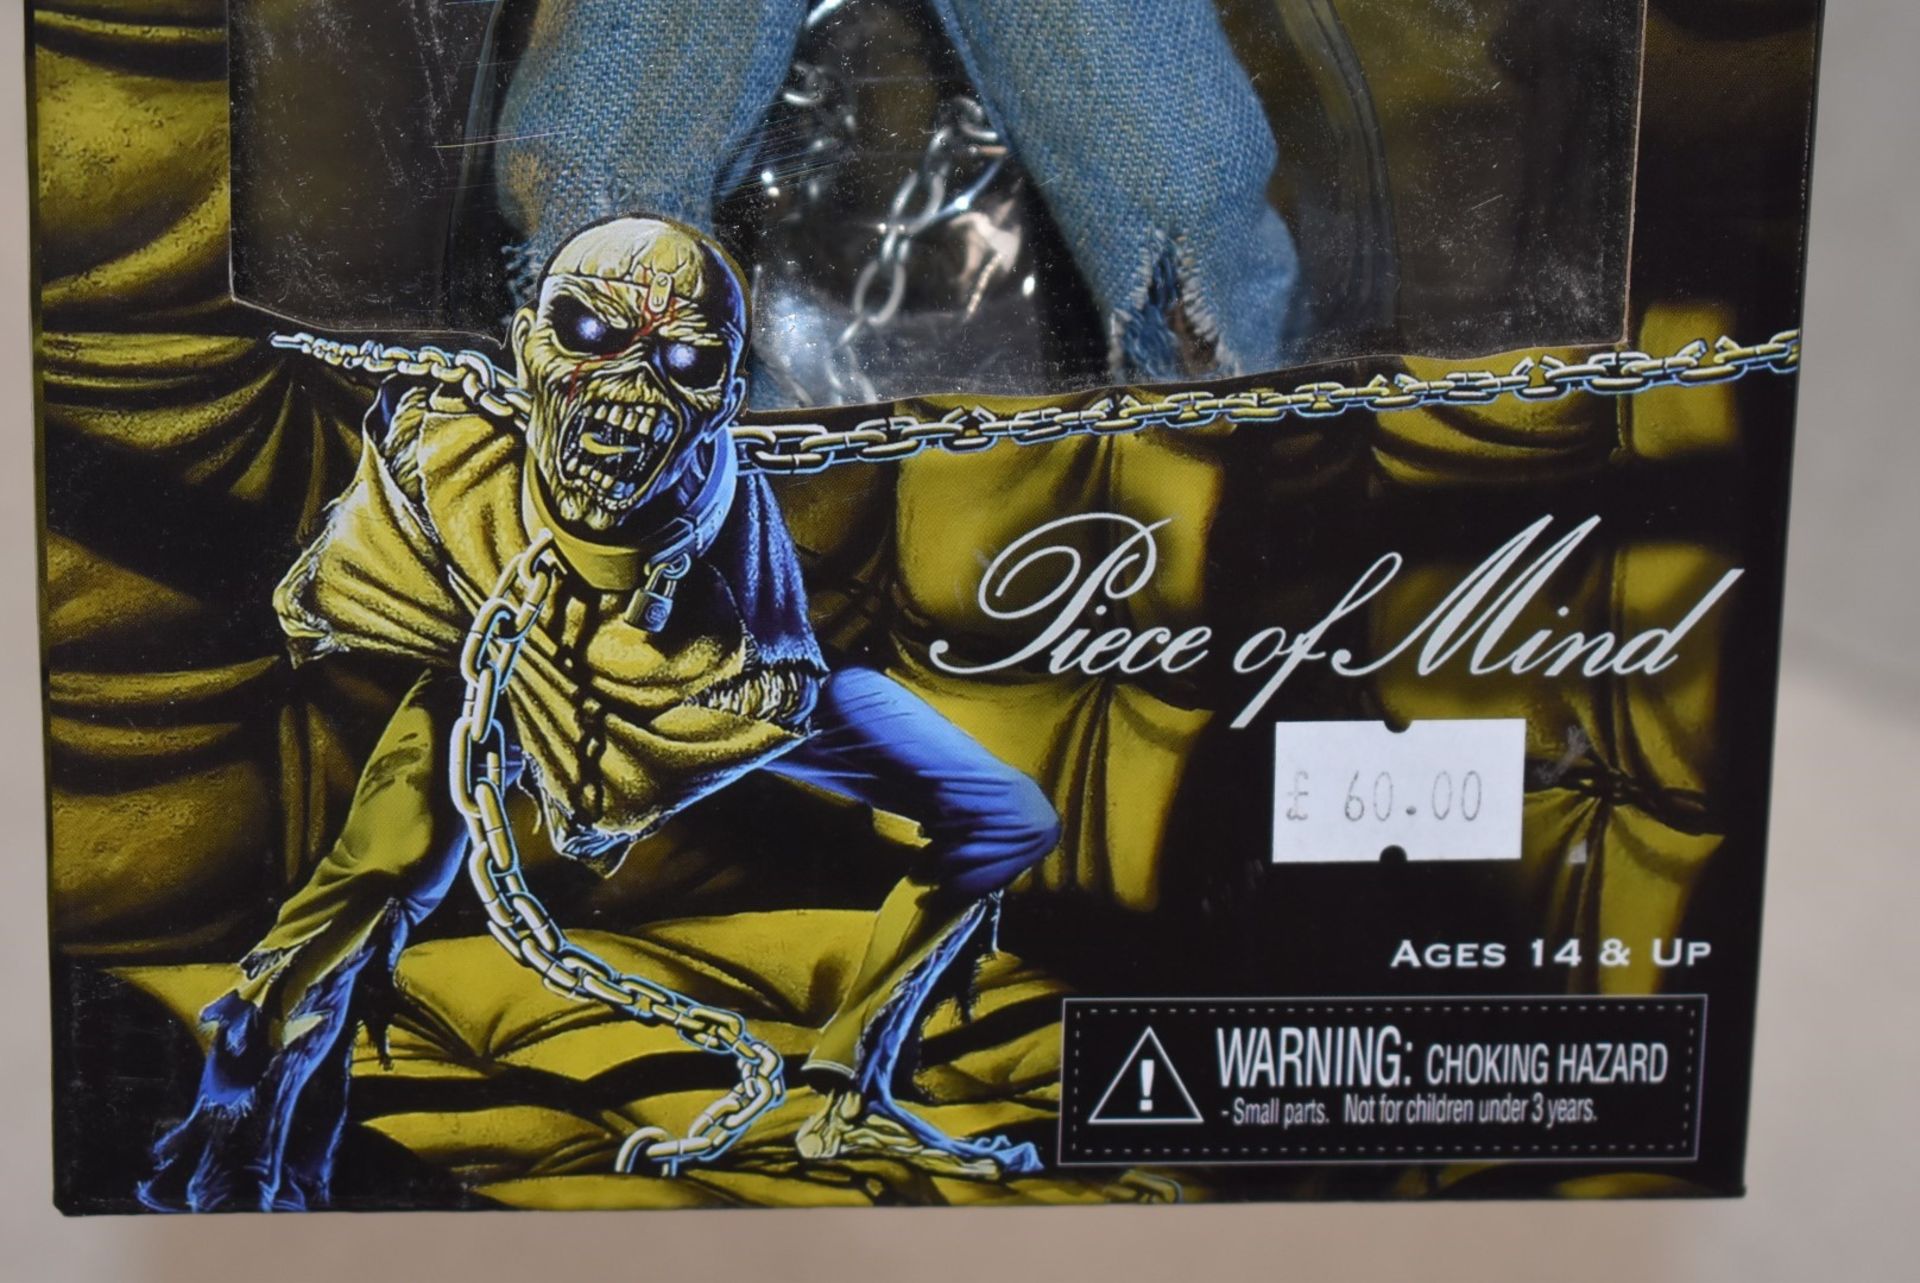 1 x Iron Maiden Piece of Mind Eddie Clothed 7 Inch Action Figure By Neca - New & Unused - RRP £60 - Image 6 of 9